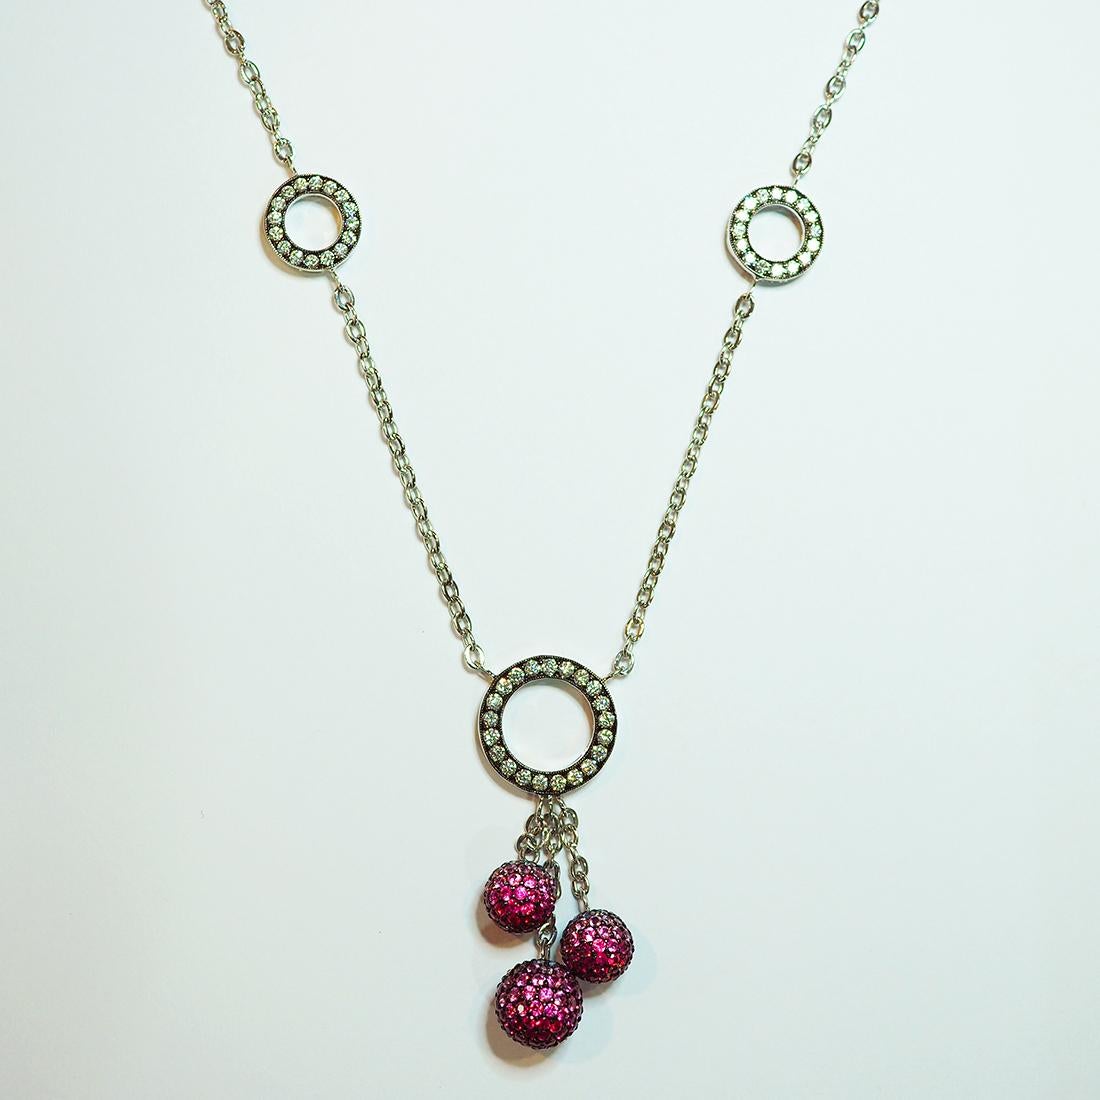 18 Karat White Gold Diamond Ruby and Pink Sapphire Ball Necklace

We design very cute 3 balls ruby and pink sapphire necklace for using in many occasions.You can use in day time and also night time for party.We graduate color of ruby and pink